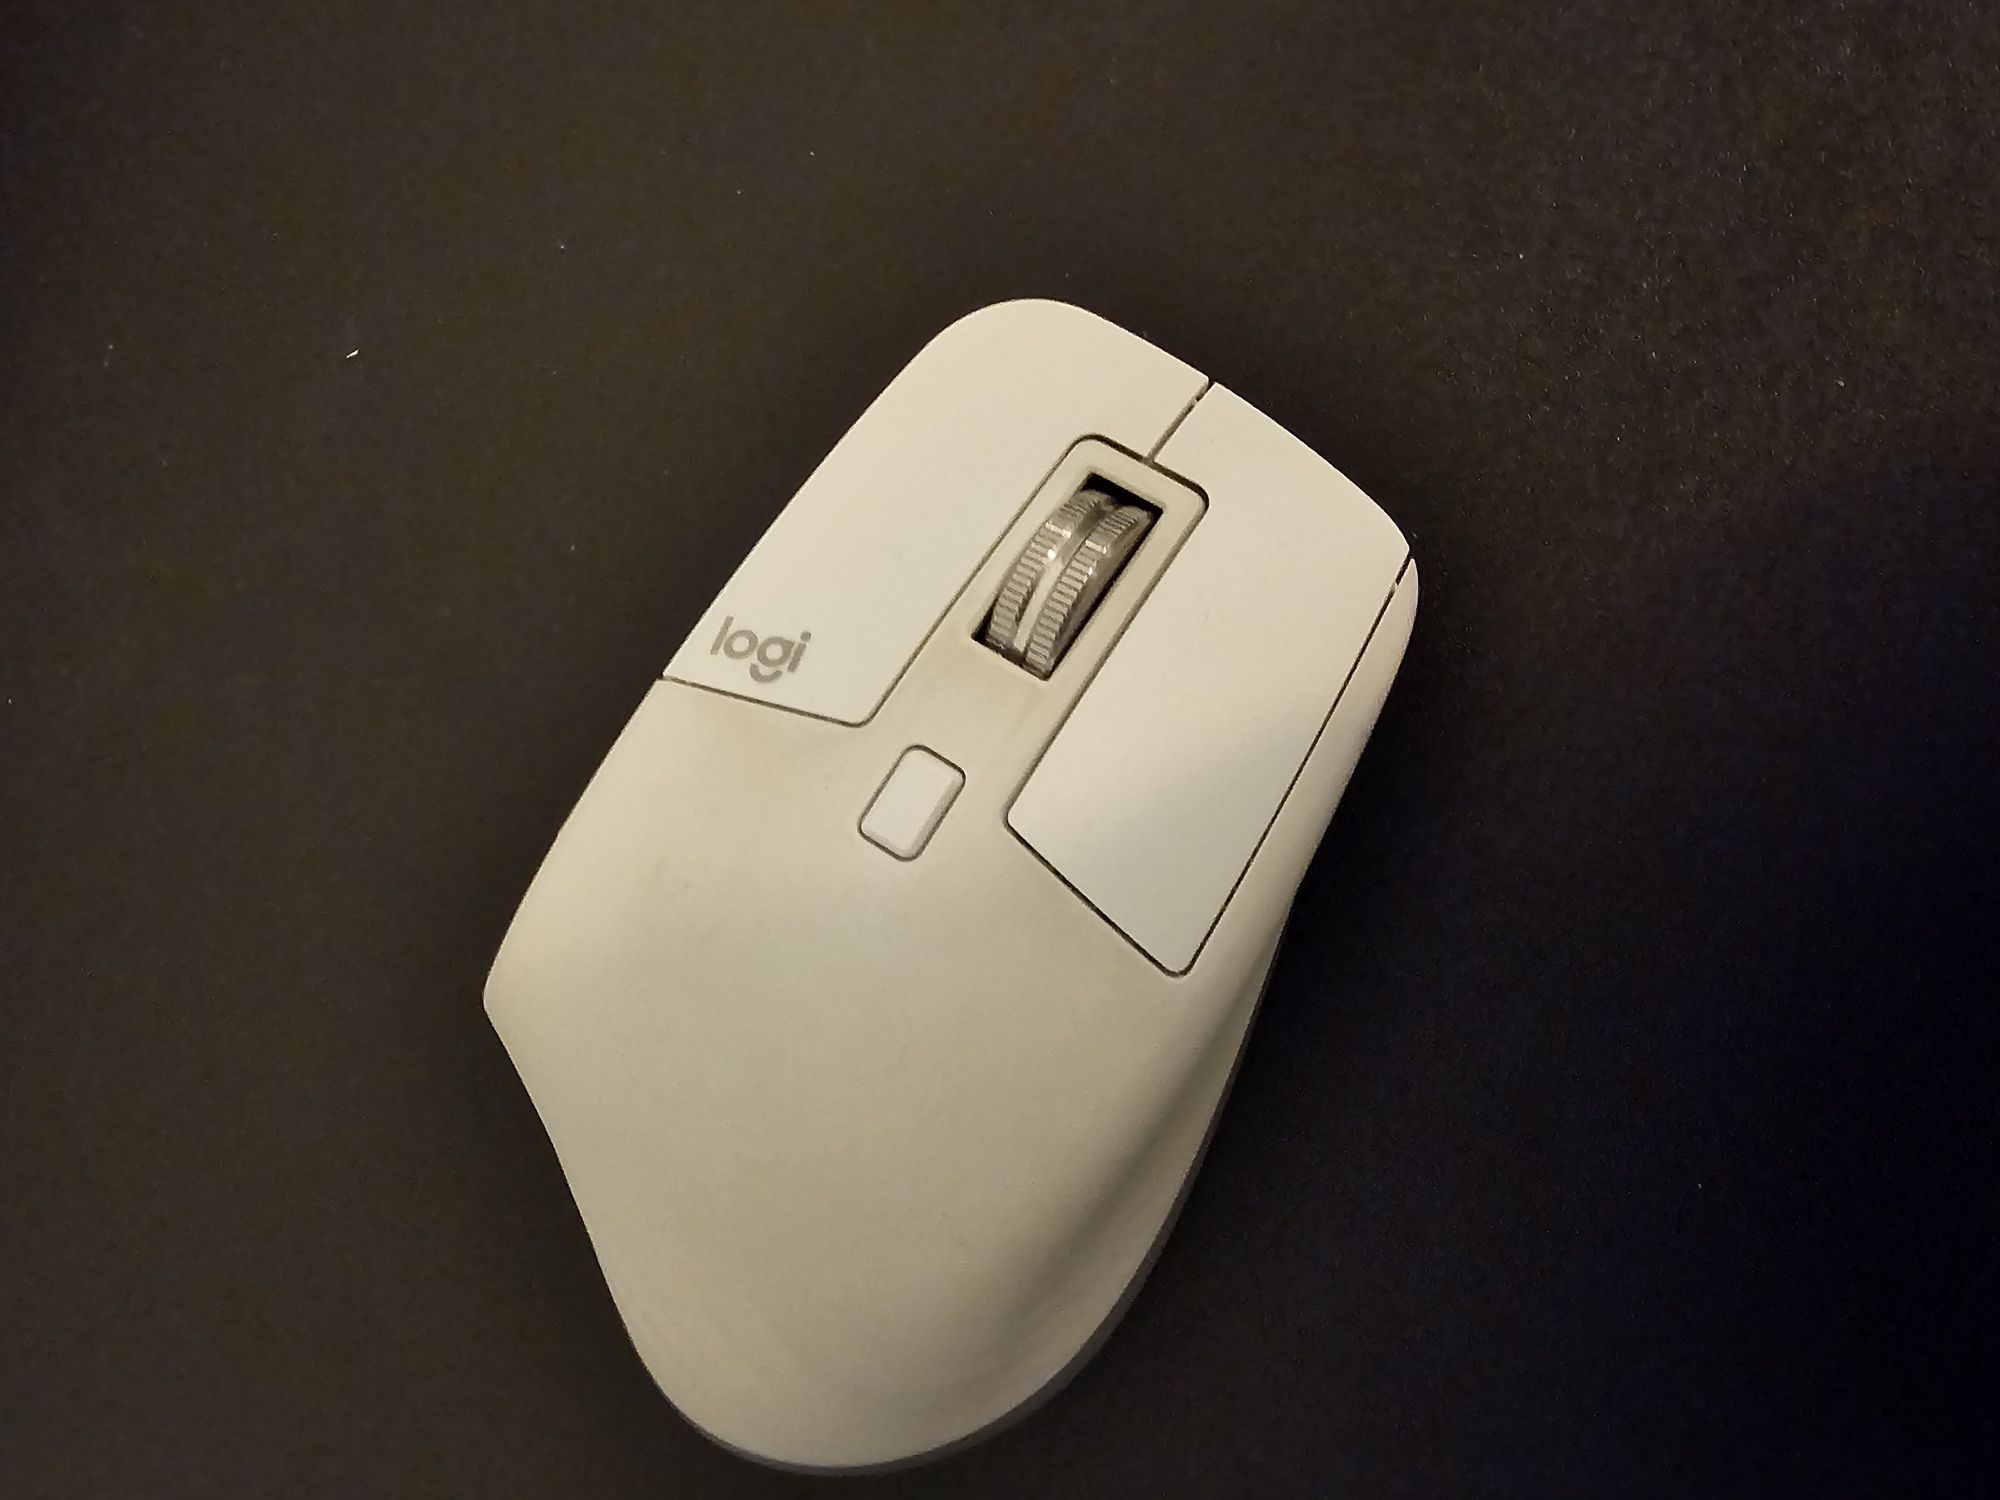 Mouse MX Master 3s + Tastatura Mecanica Qwertykey